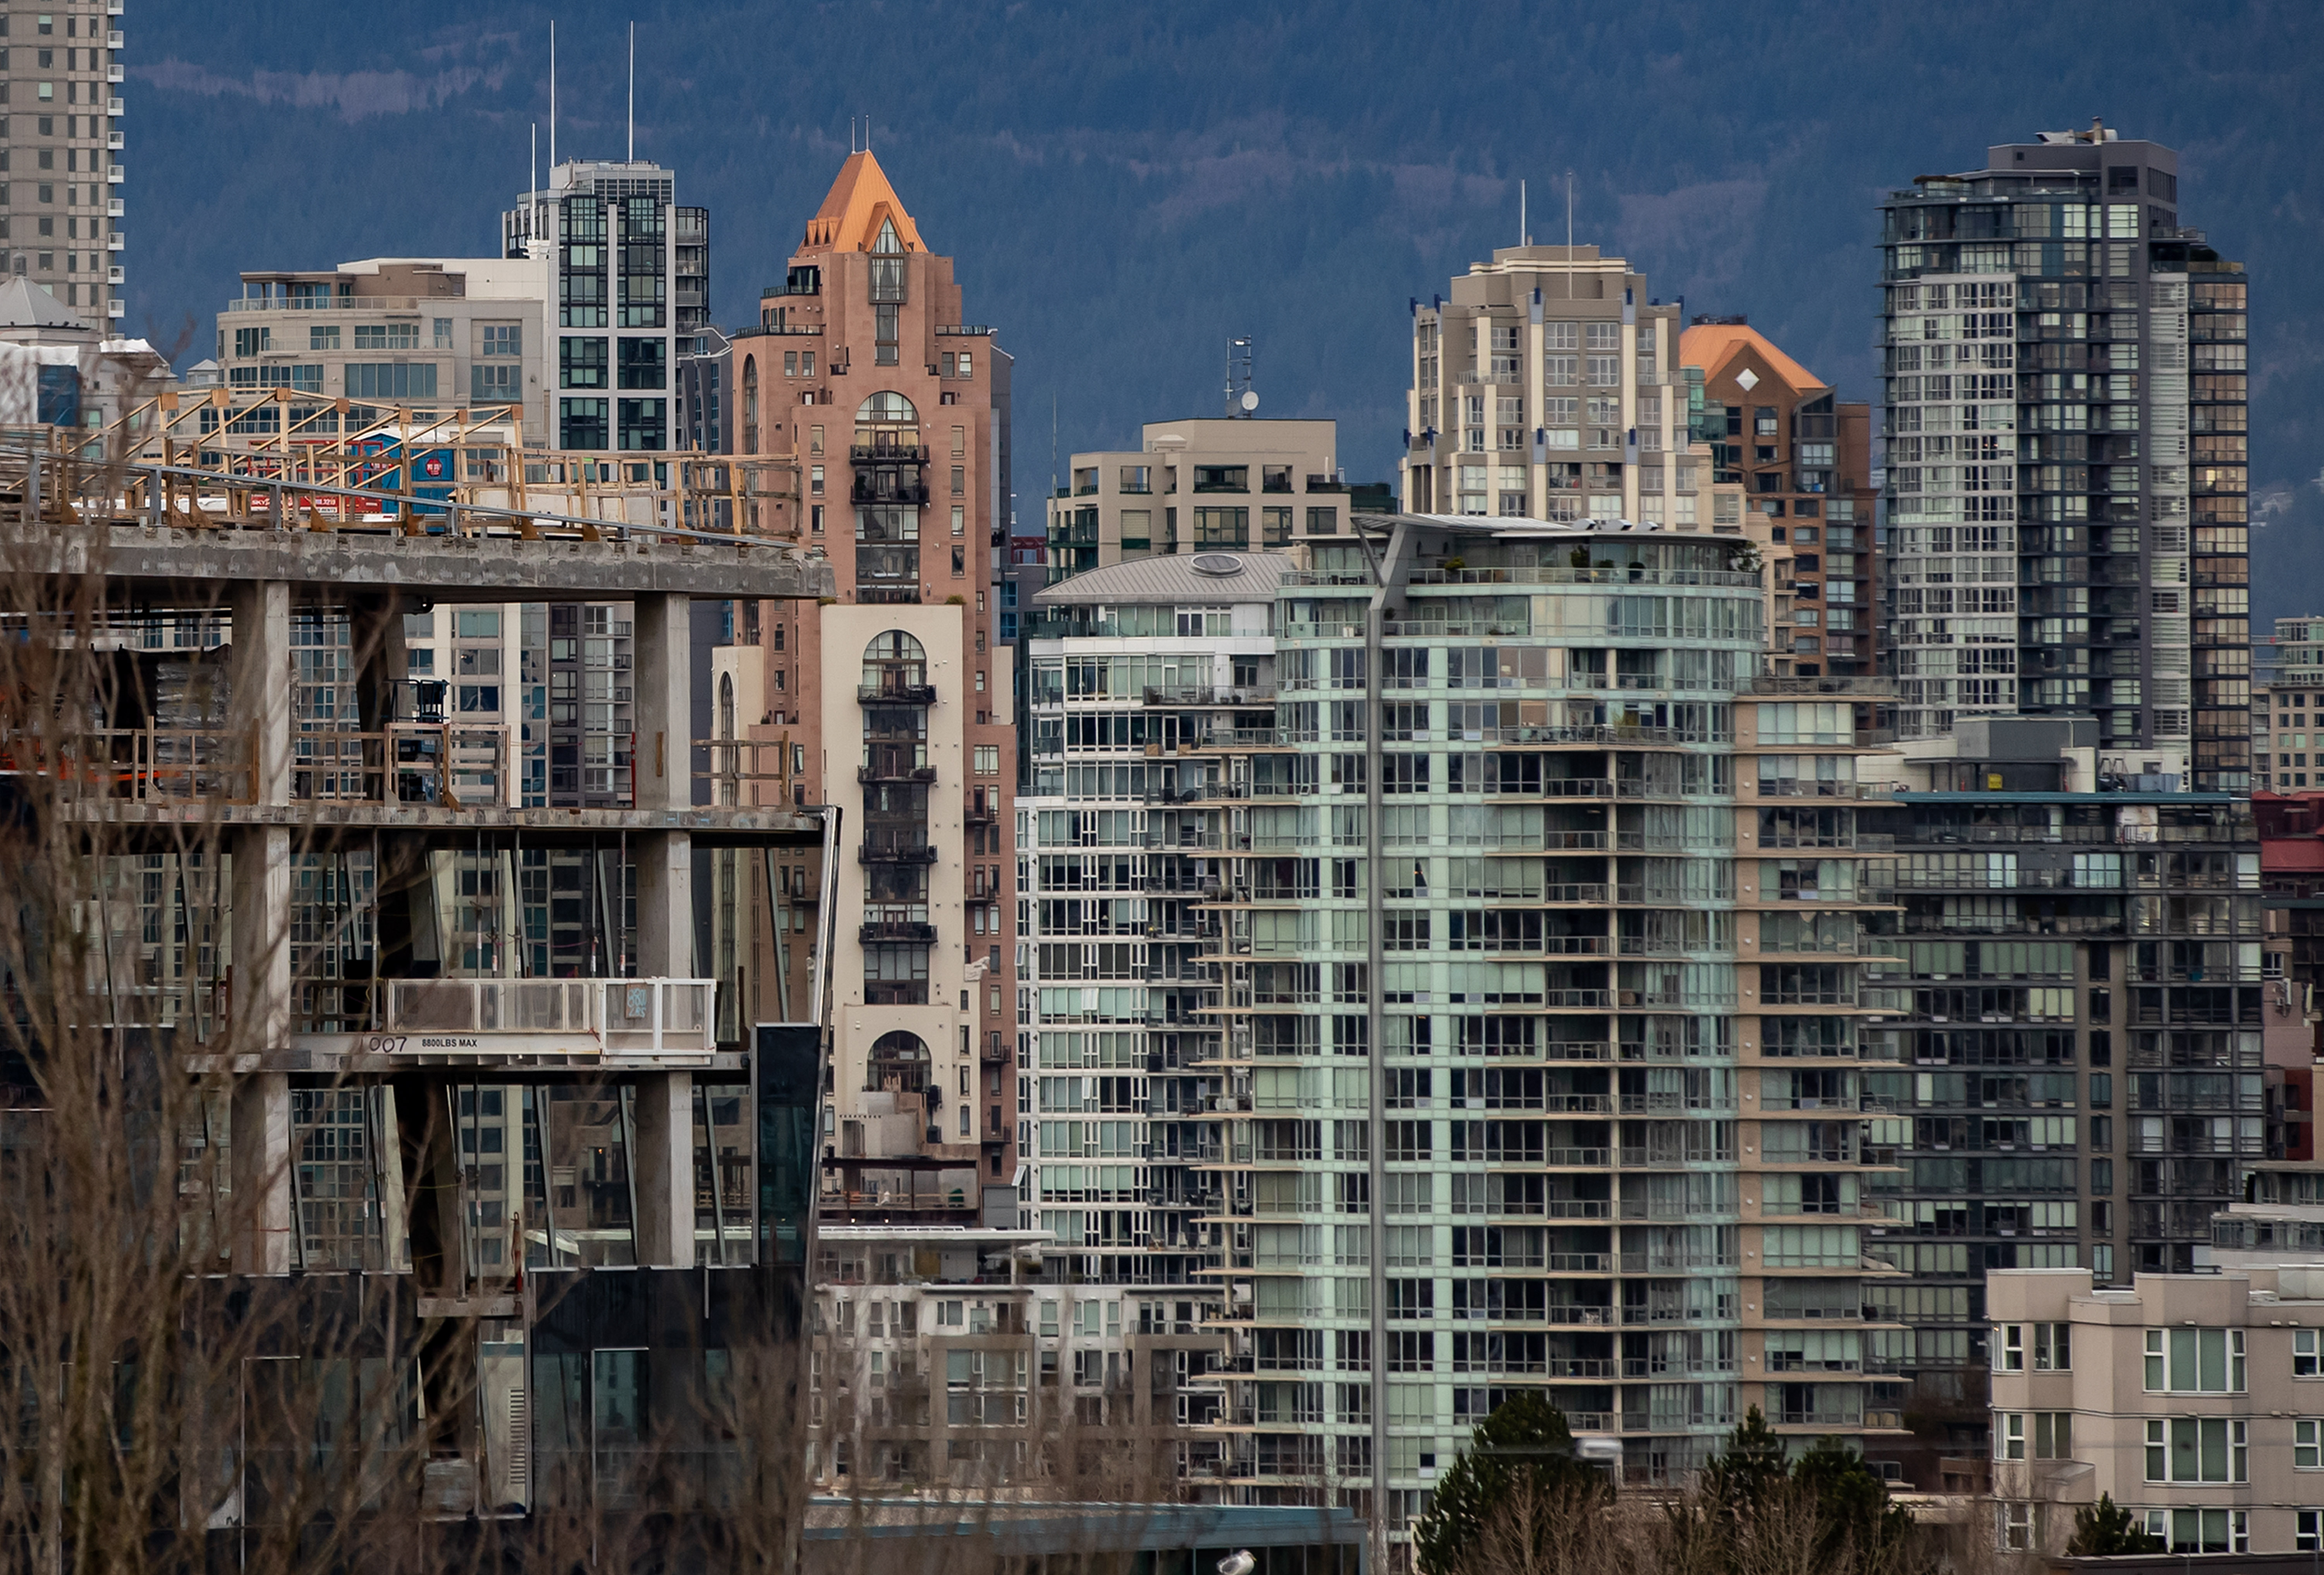 Condo towers are seen in downtown Vancouver on Saturday, Jan. 9, 2021. (Darryl Dyck / THE CANADIAN PRESS)